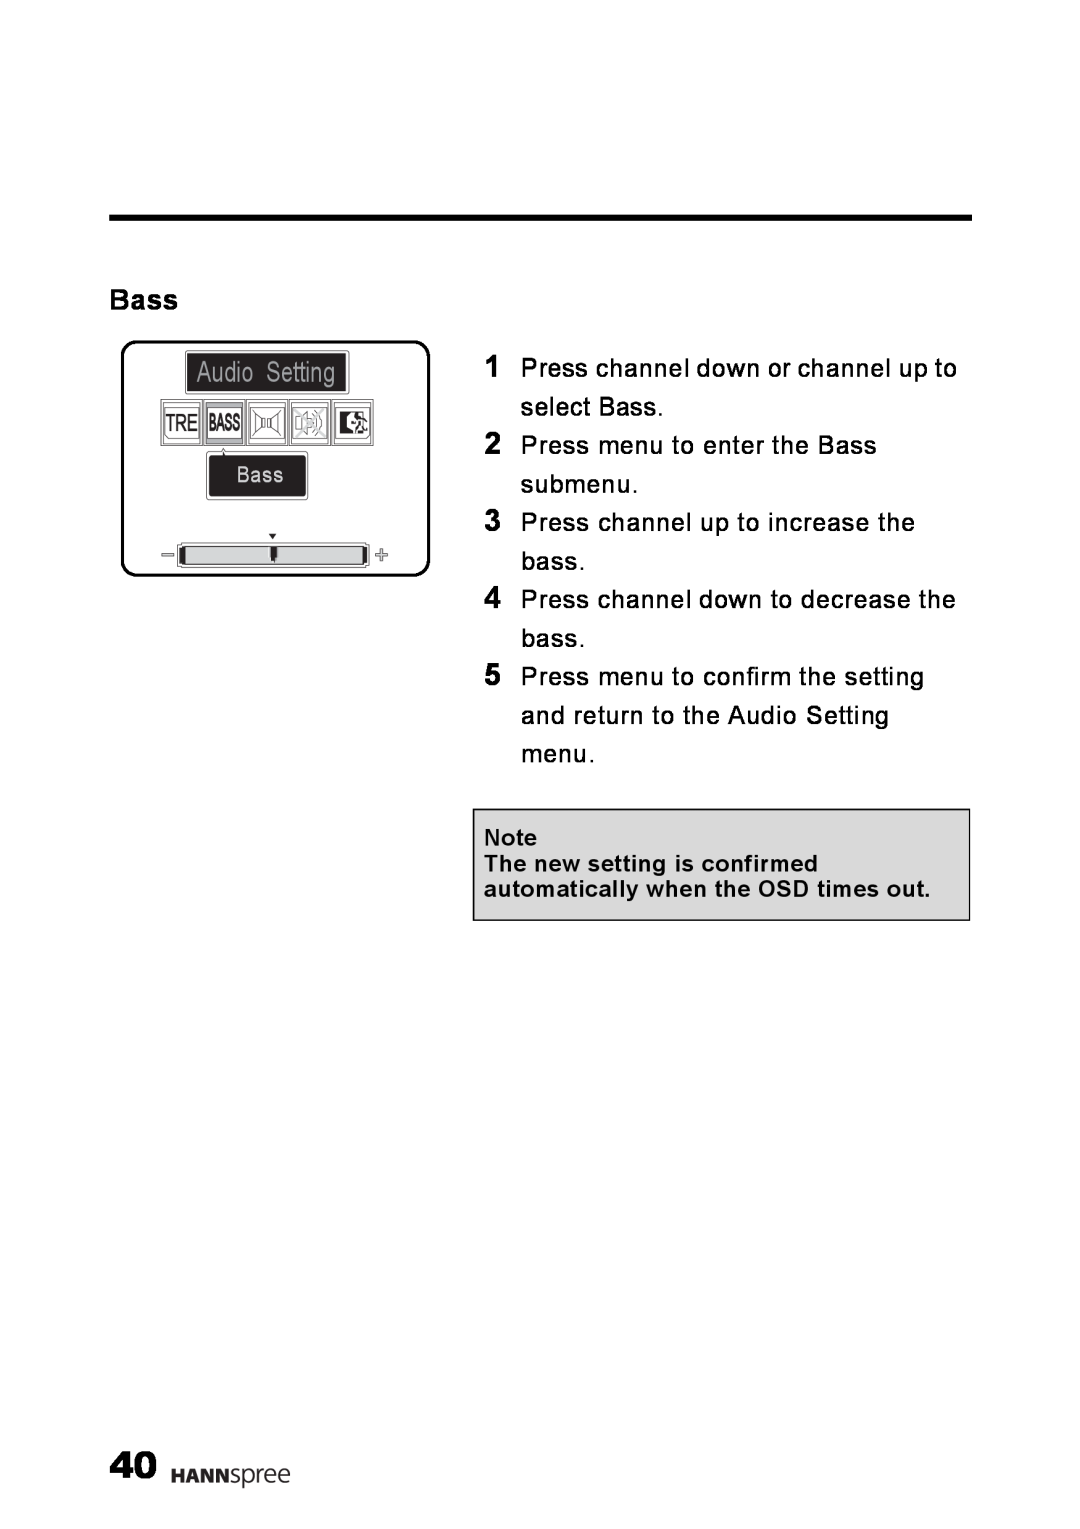 HANNspree LT02-12U1-000 user manual Audio Setting, Press channel down or channel up to select Bass, Tre Bass 